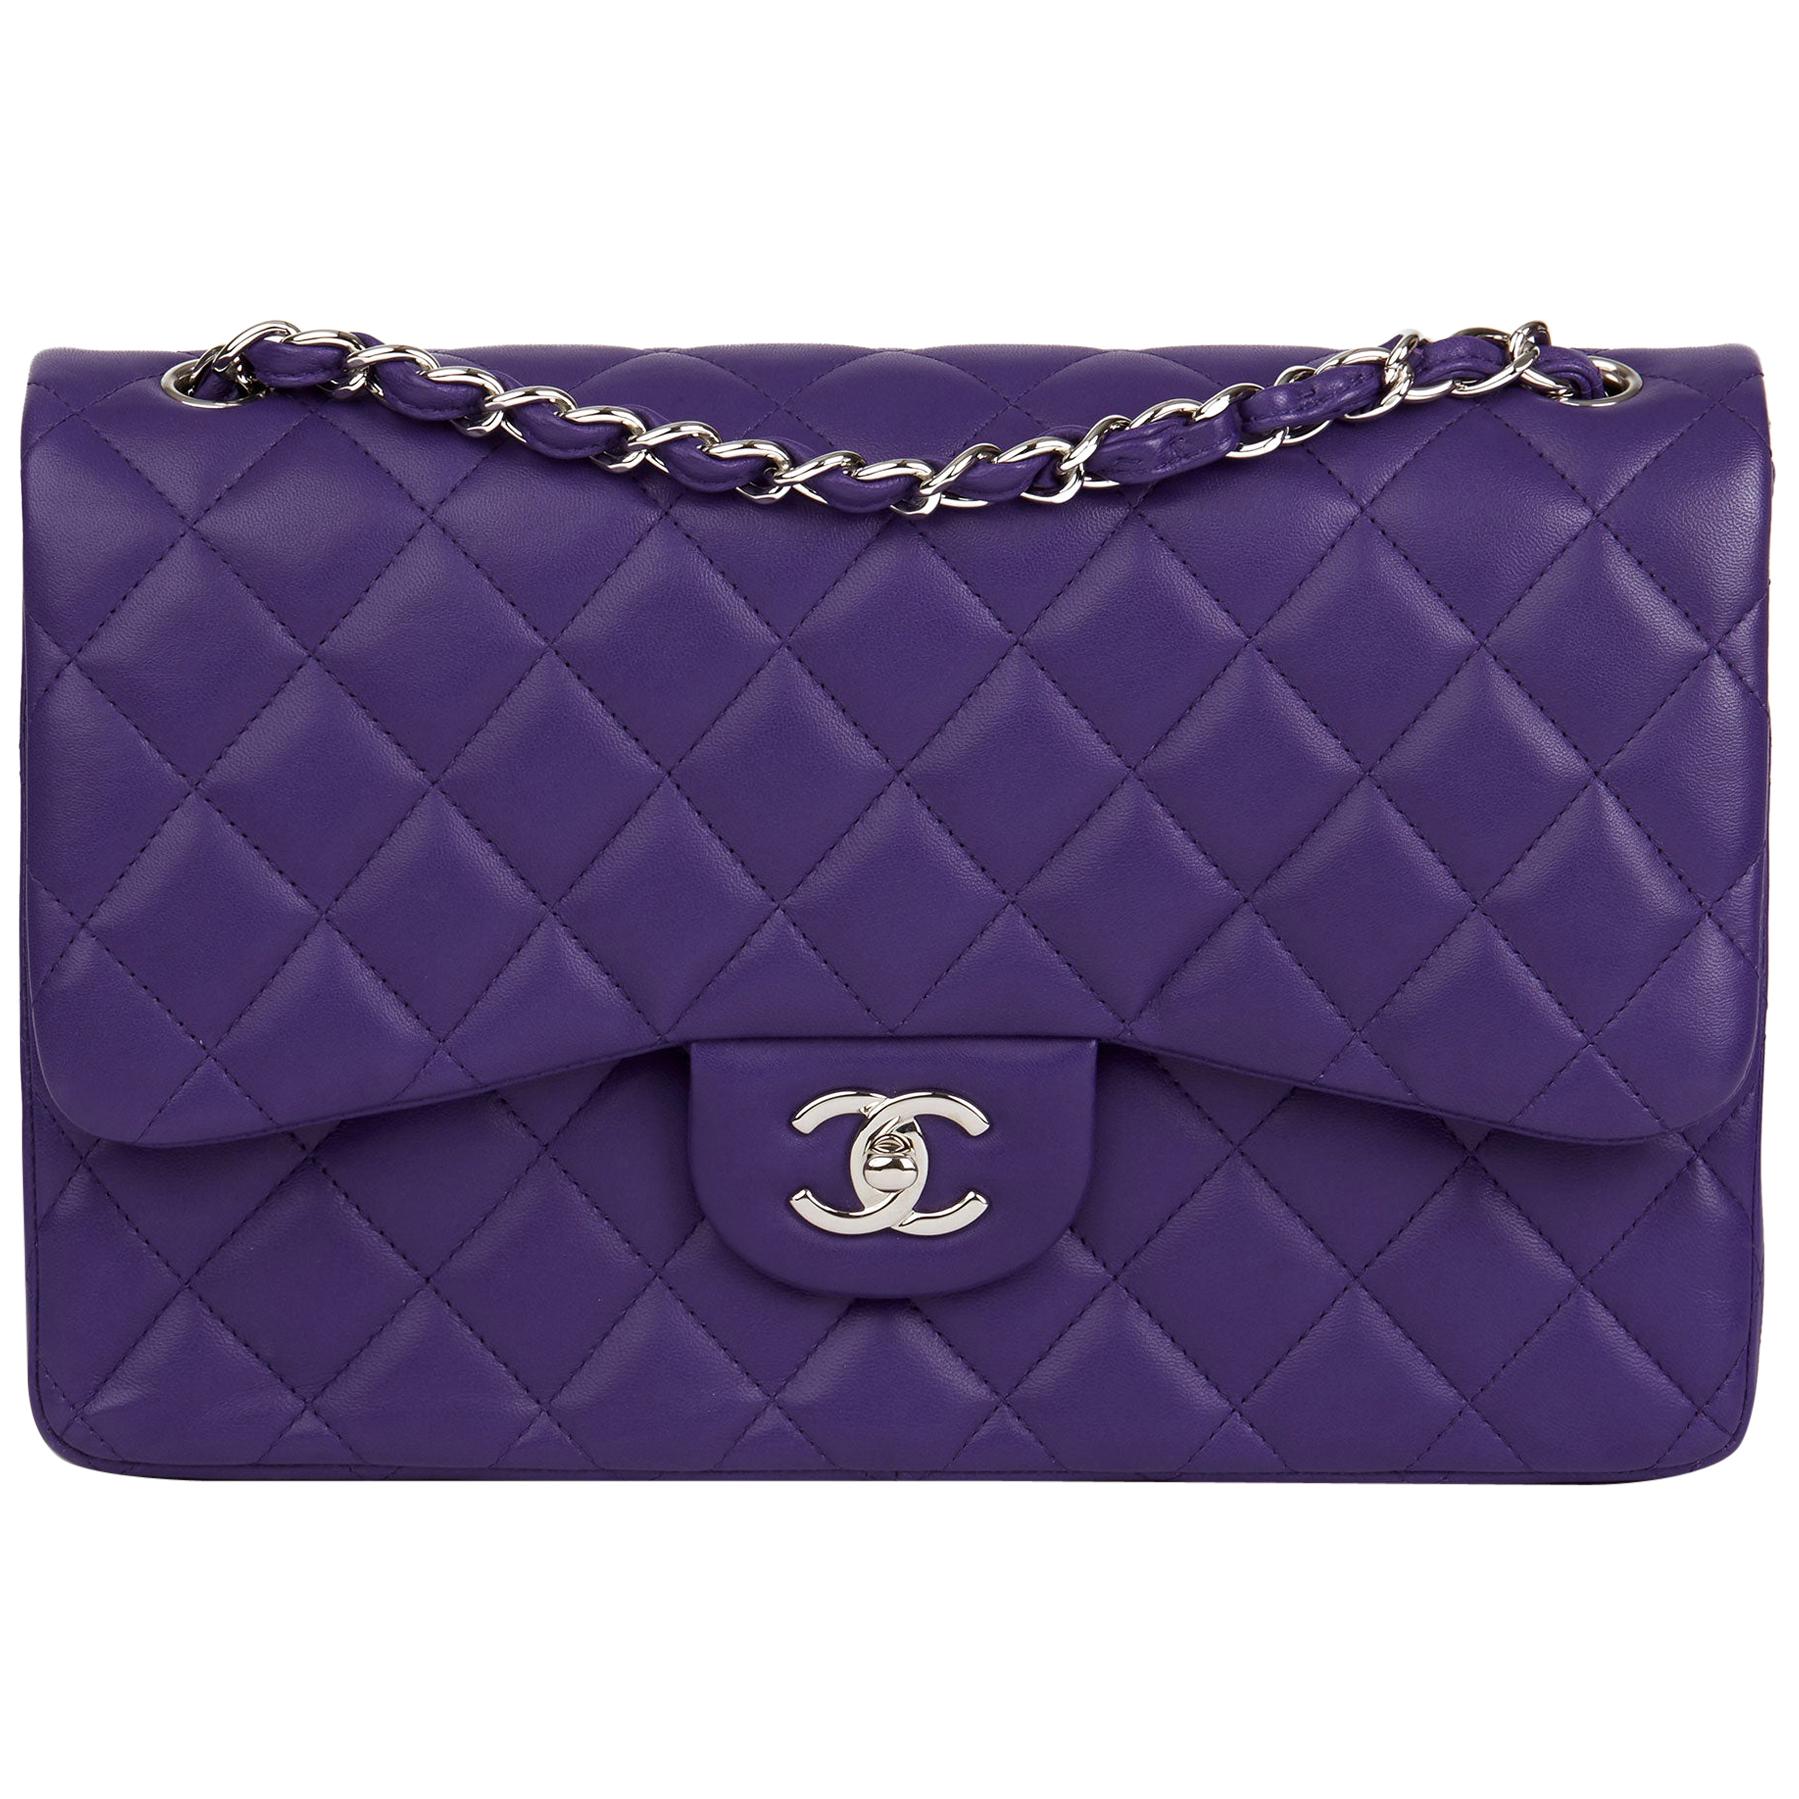 2016 Chanel Purple Quilted Lambskin Jumbo Classic Double Flap Bag